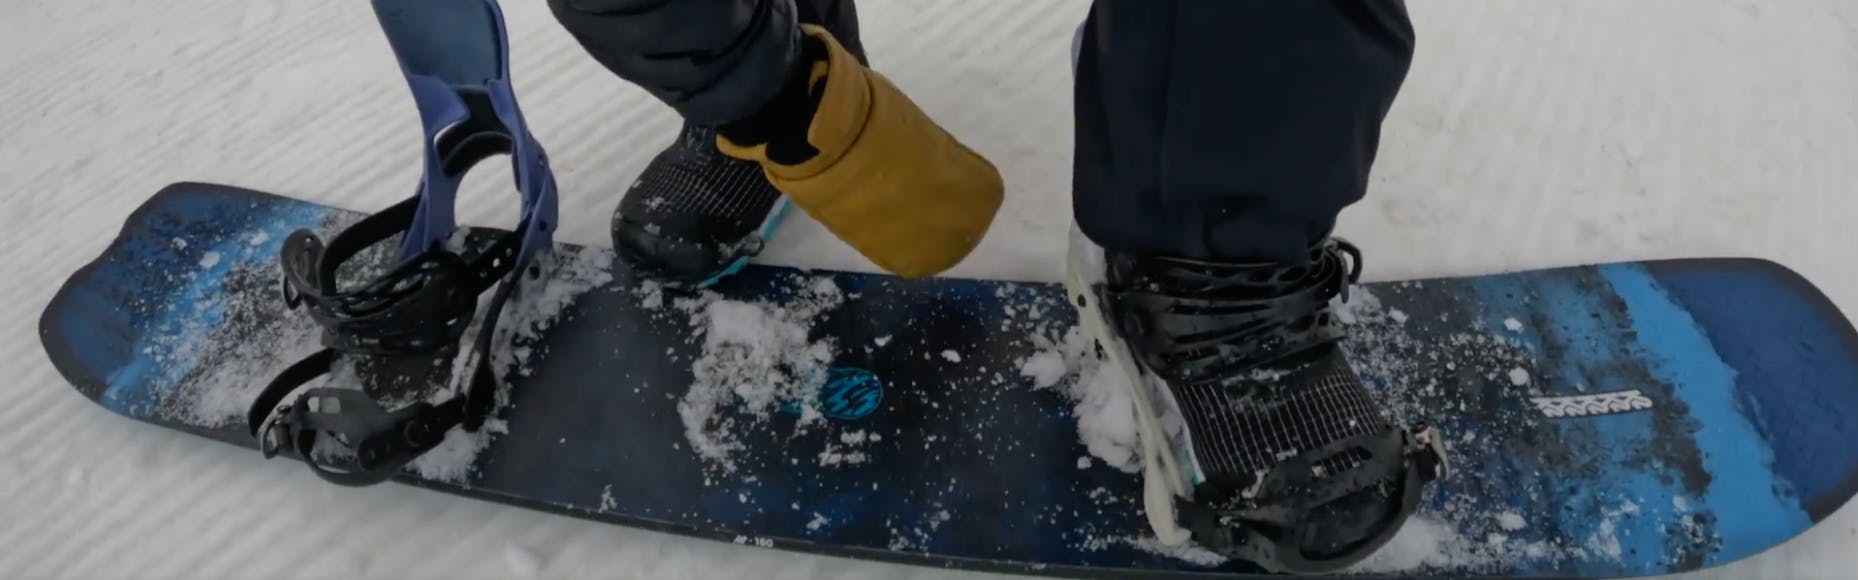 Strapping into the 2023 K2 Alchemist snowboard